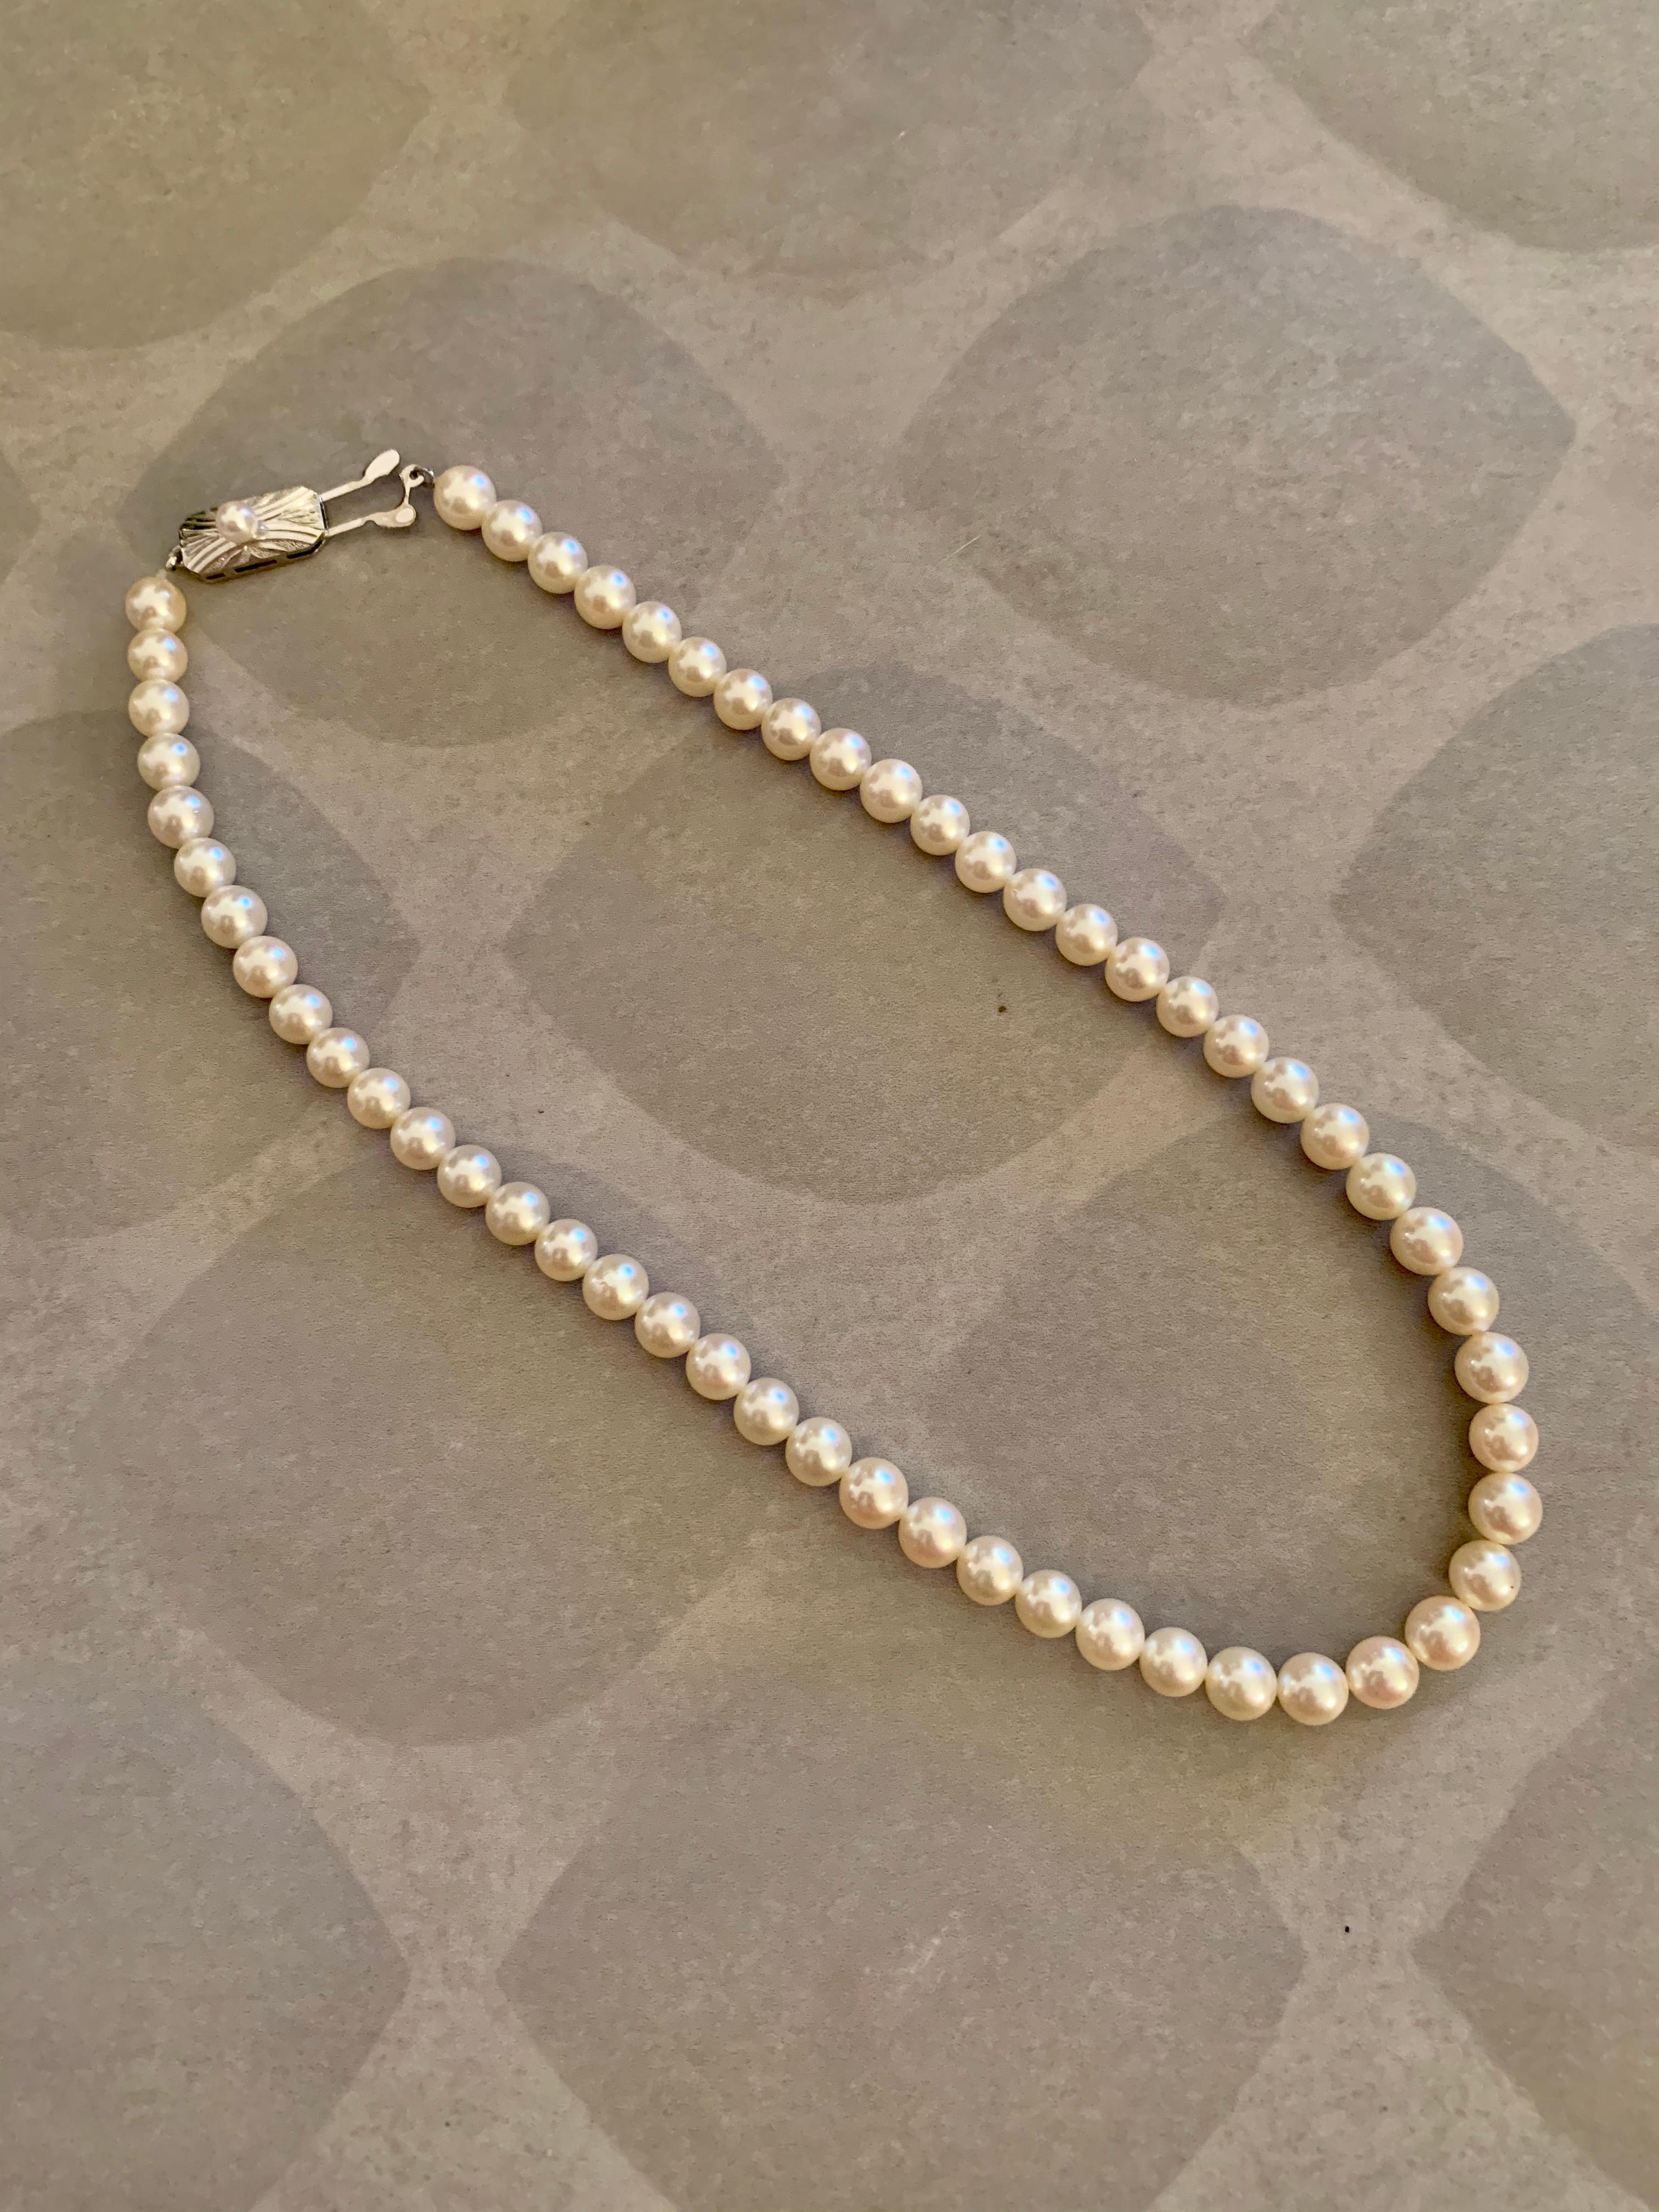 This vintage Mikimoto strand features Pearls 6.5mm in size which have a beautifully, fine luster.  The strand is 14 1/2